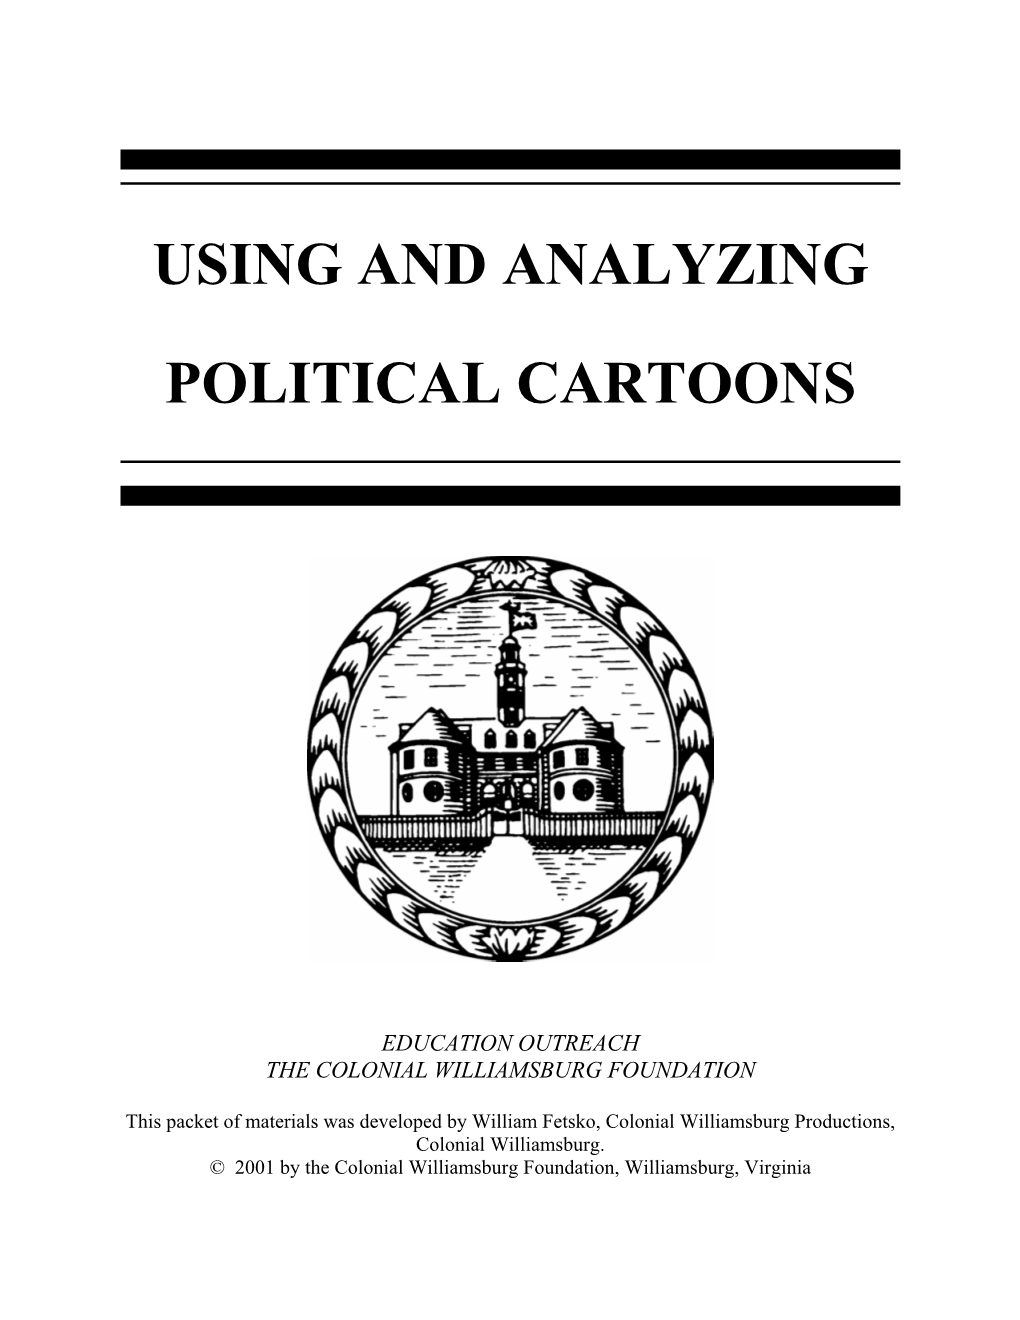 Using and Analyzing Political Cartoons